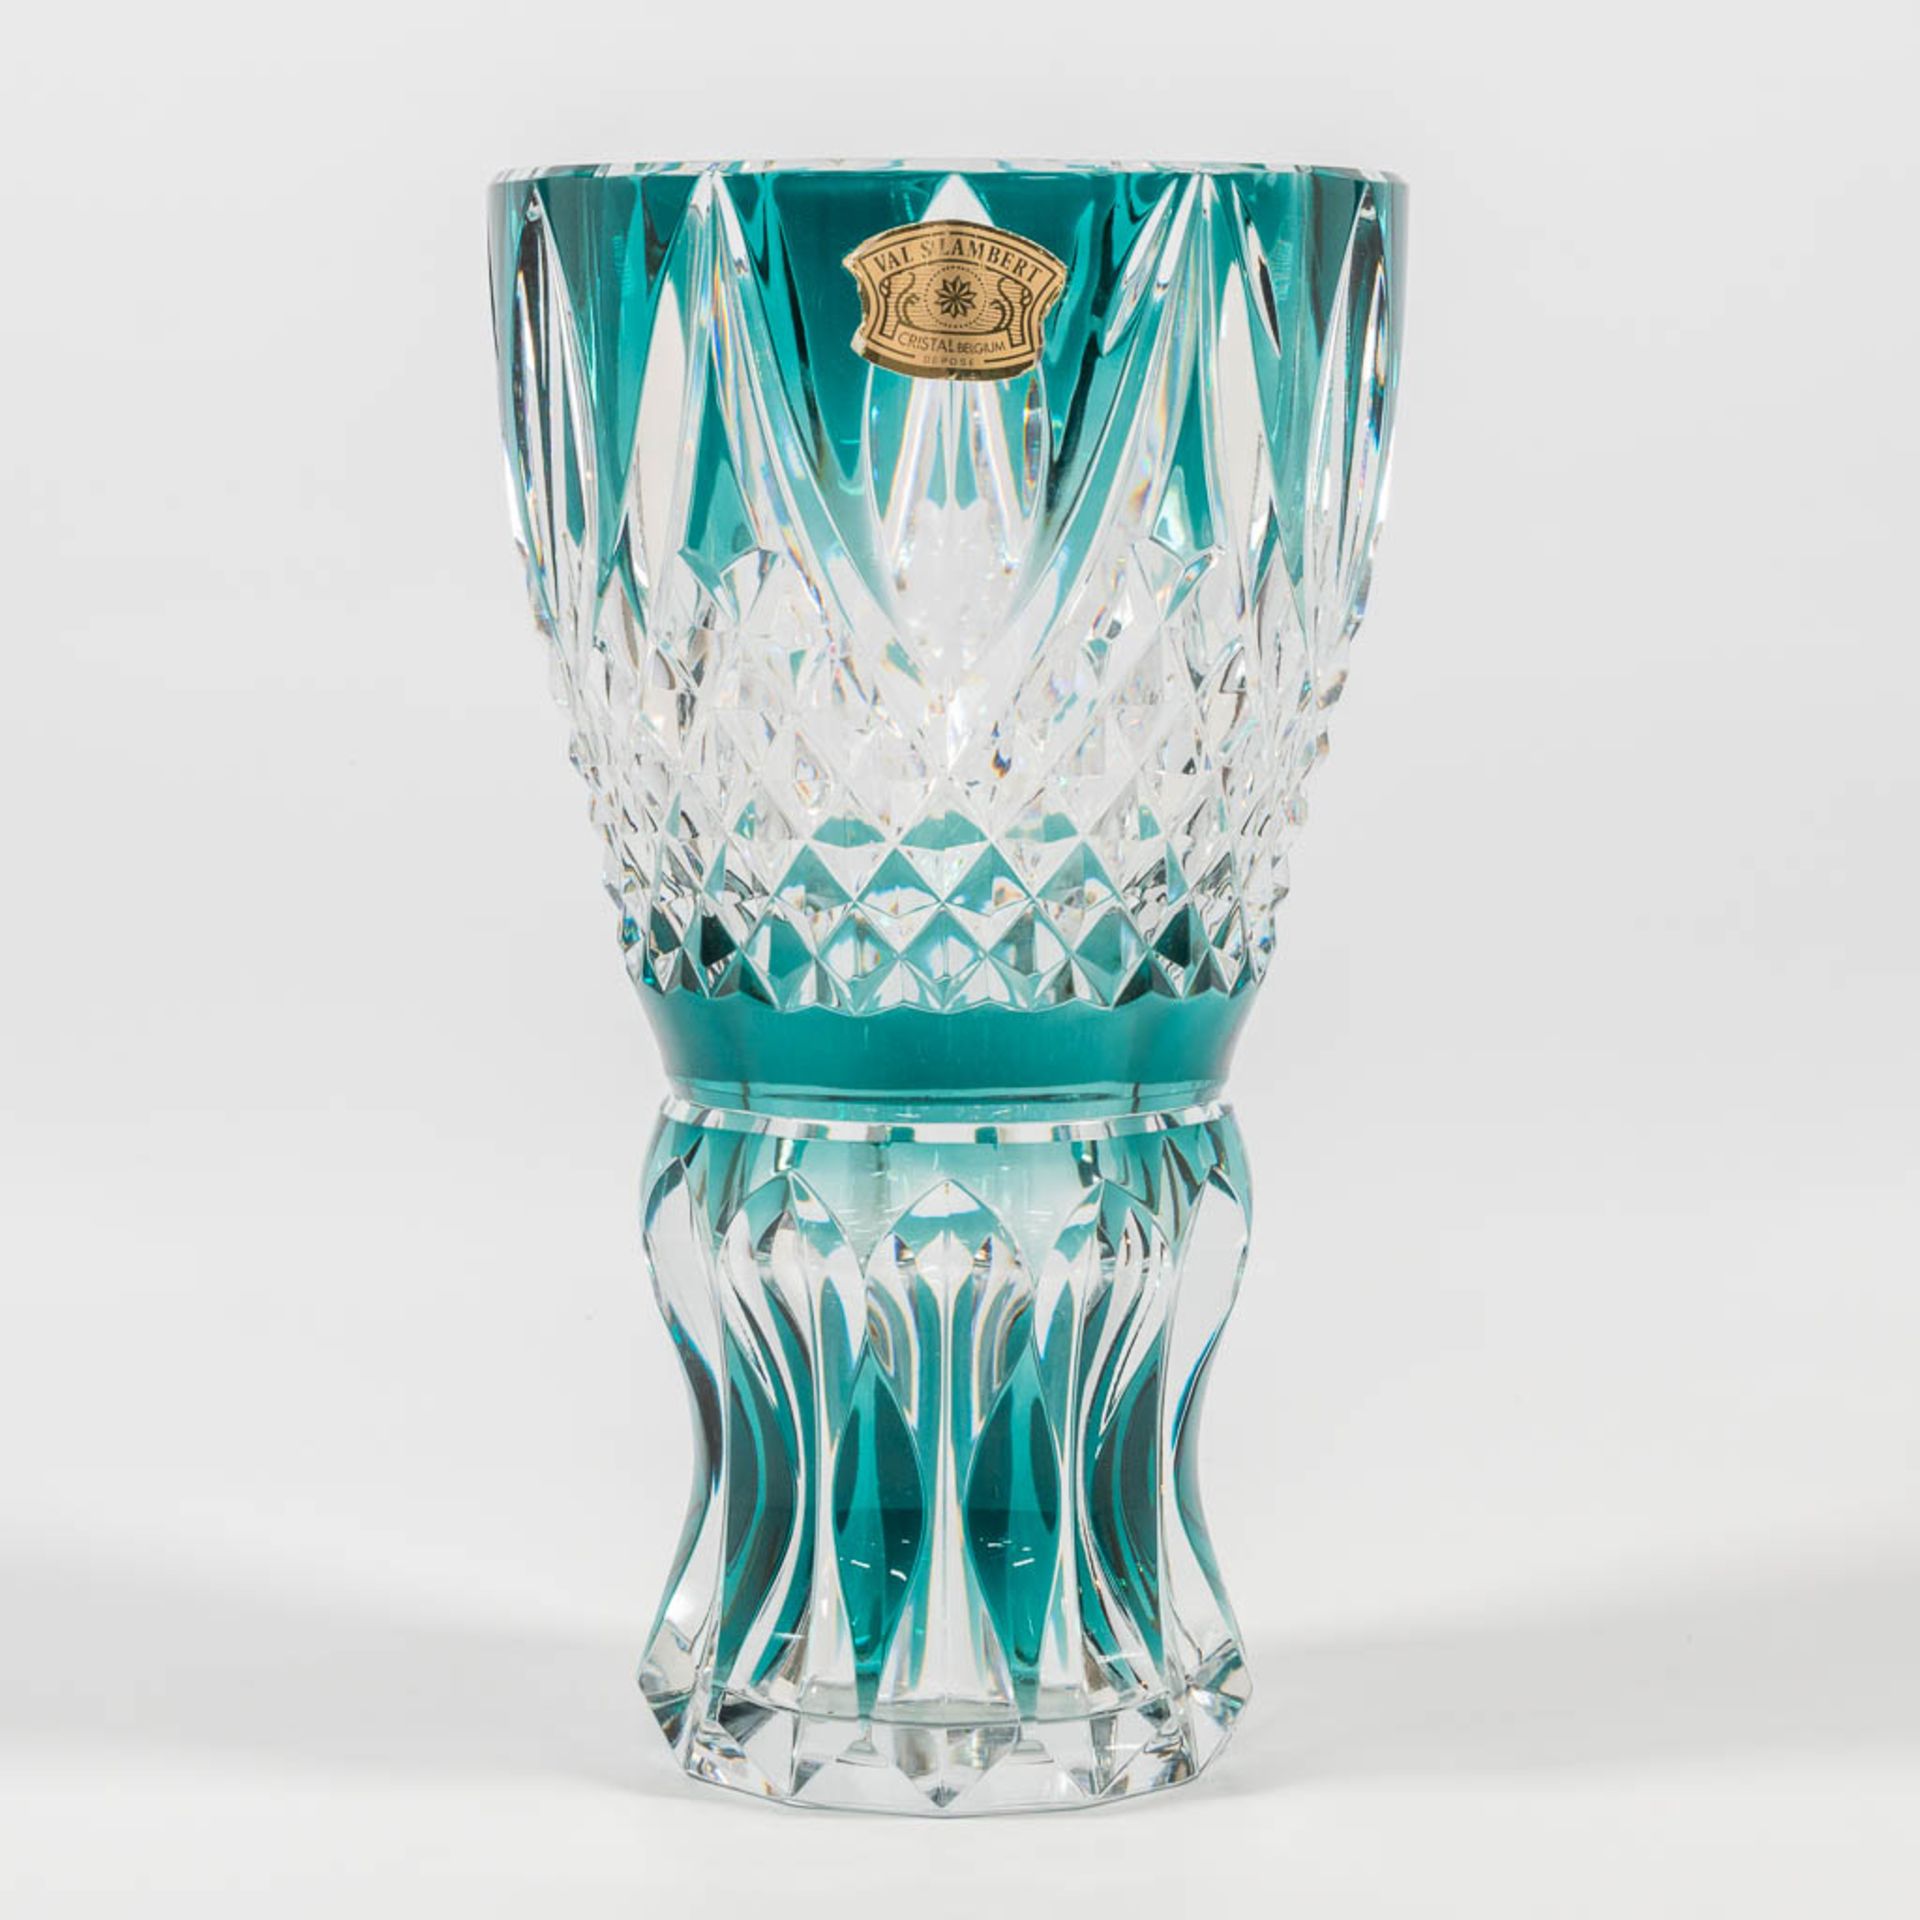 A large Val Saint Lambert crystal vase, marked with sticker and signature.